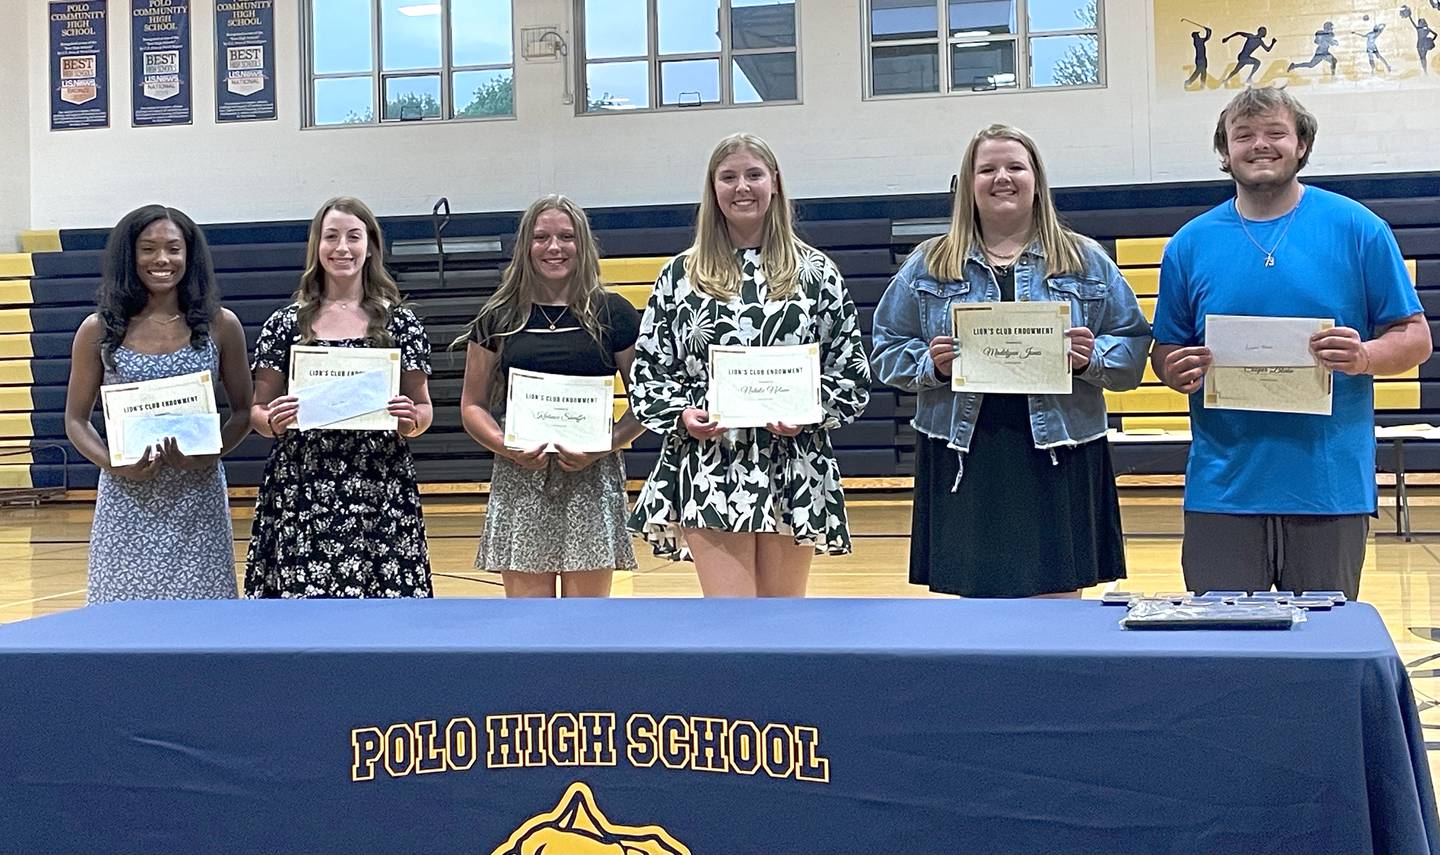 Polo Community High School held its awards night on May 11 during which the Polo Lions Club gave six scholarships. Pictured here, left to right, are the students who received the scholarships Emileigh Williams, who will attend Northern Illinois University; Kealie Wilcox, who will attend Sauk Valley Community College; Kadence Sheaffer, who will attend Illinois State University; Natalie Nelson, who will attend Carroll University; Madelynn Jones, who will attend Sauk Valley Community College; and Cooper Blake, who will attend Sauk Valley Community College. Ryan Shetler presented the scholarships.